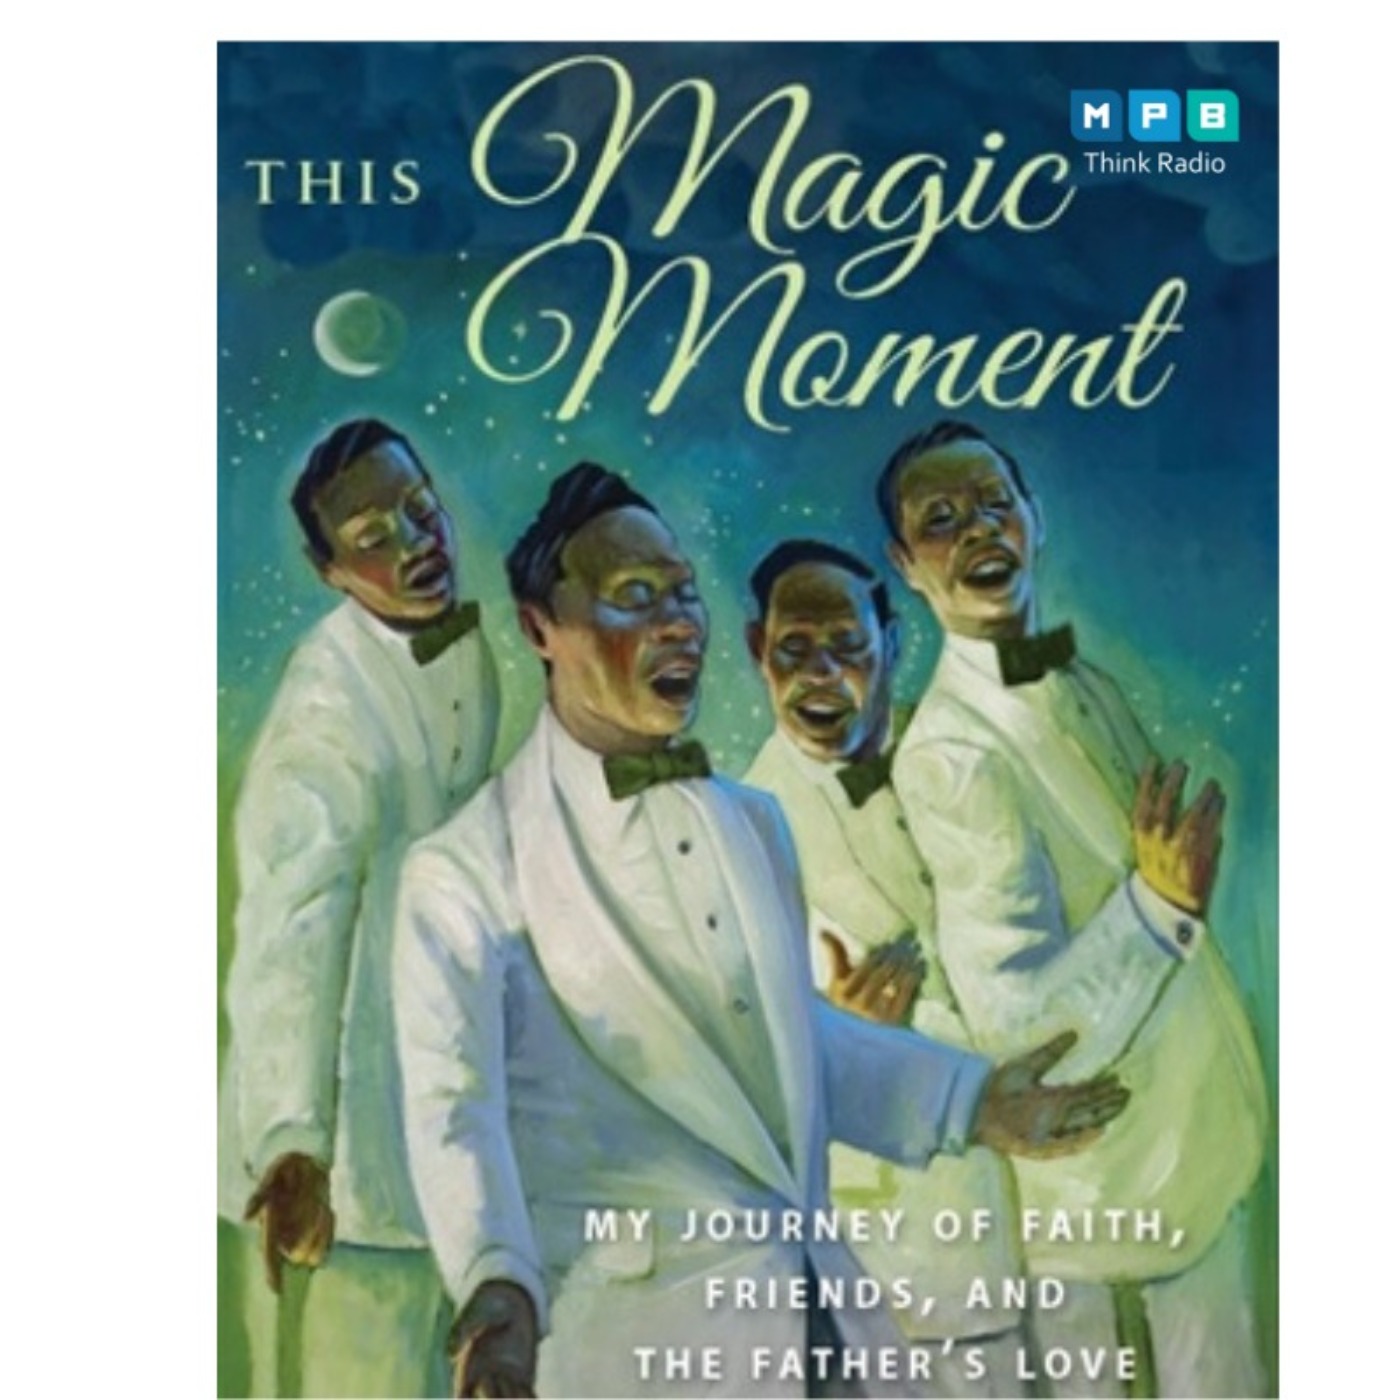 cover art for Now You're Talking w/ Marshall Ramsey| "This Magic Moment" with William Morris